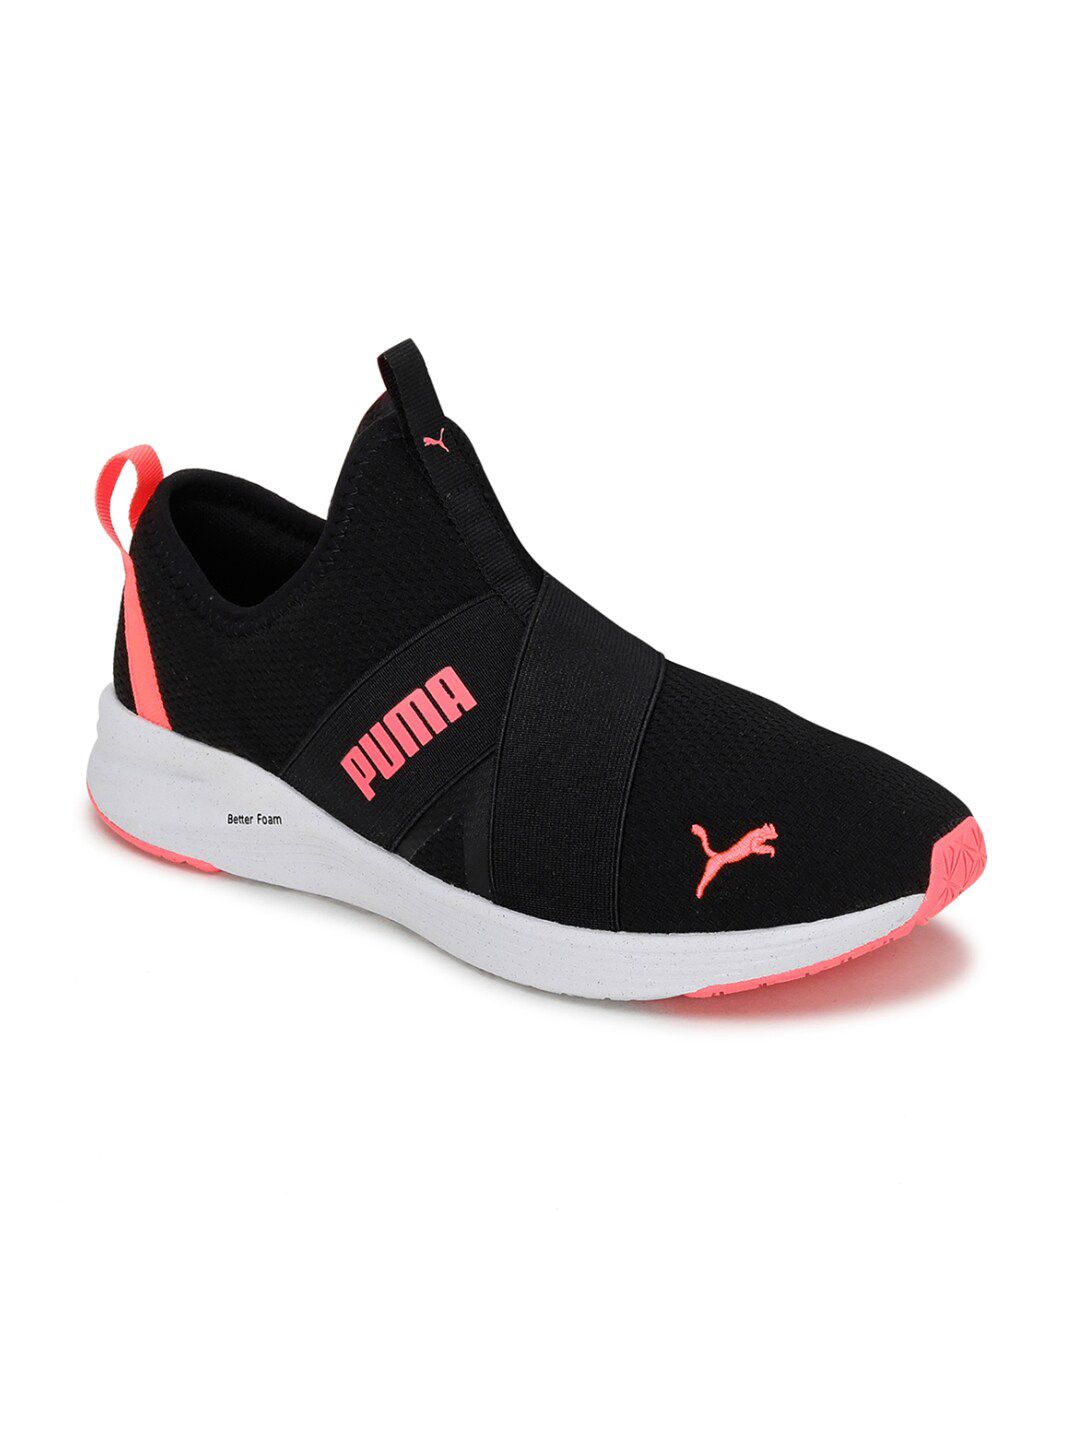 Puma Women Black Textile Training or Gym Shoes Price in India